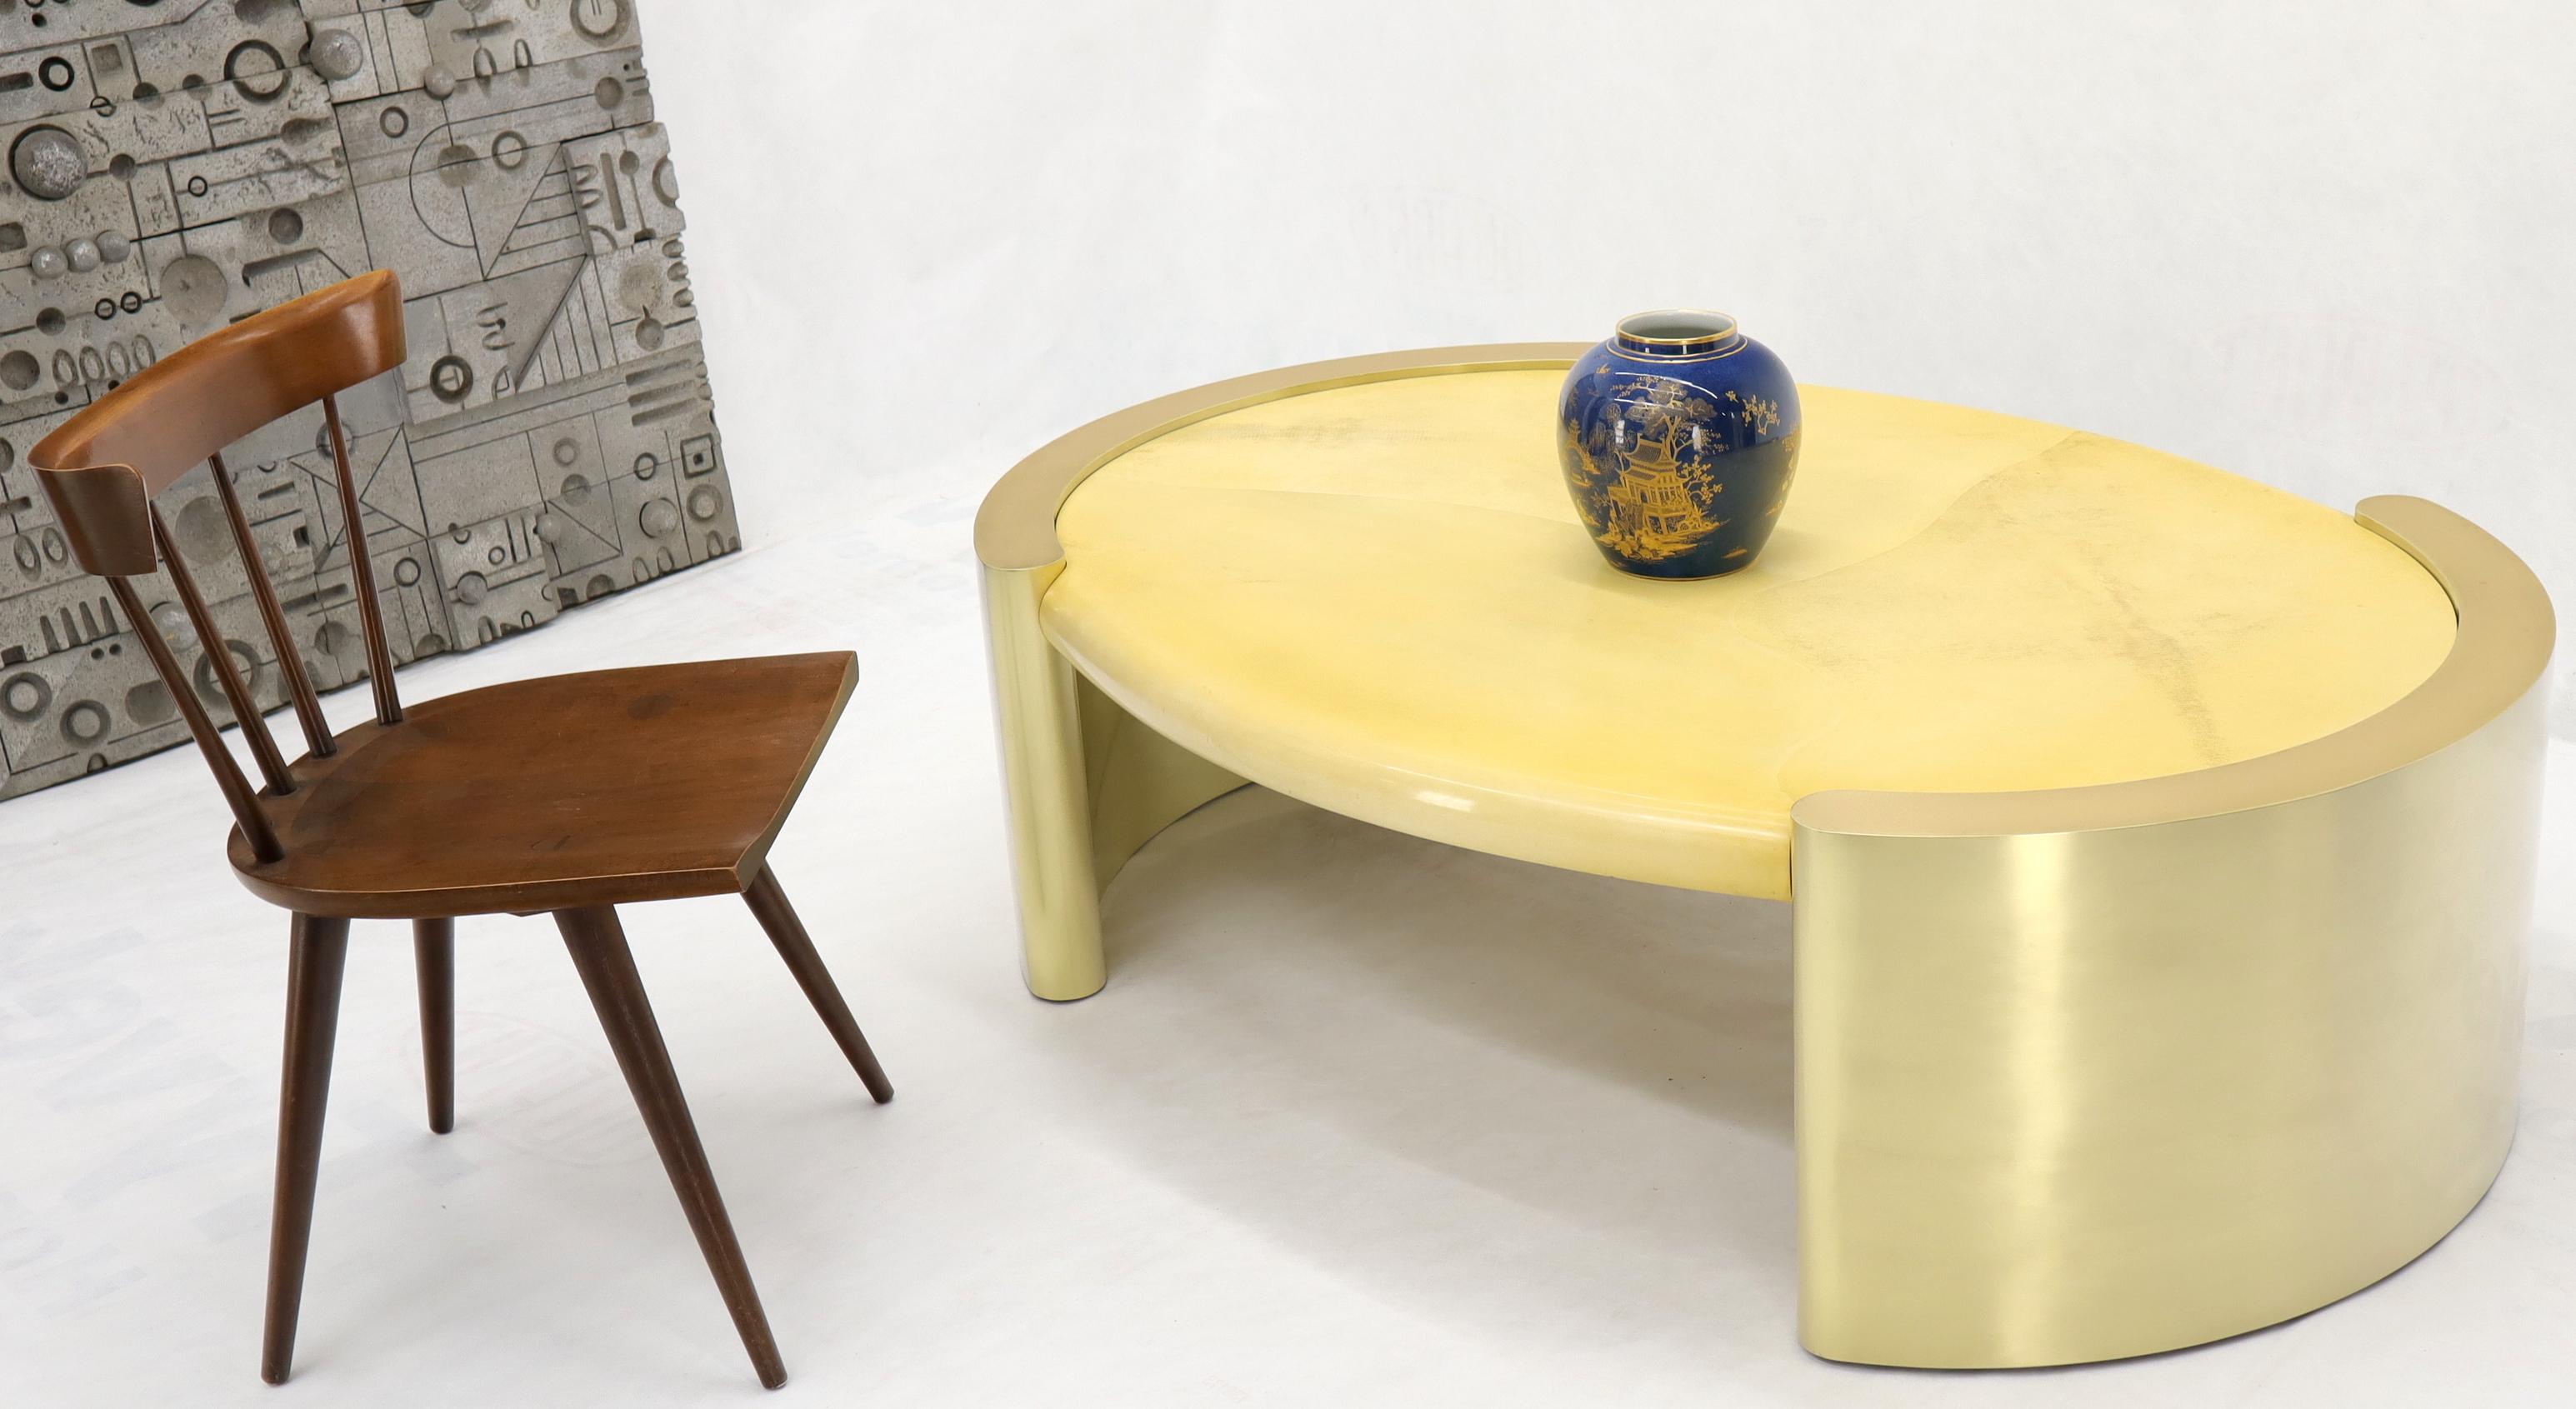 Massive oval coffee table consisting of forged brass bases and lacquered goatskin parchment top. Matches Karl Sptinger decor and possibly designed by him. Unsigned.